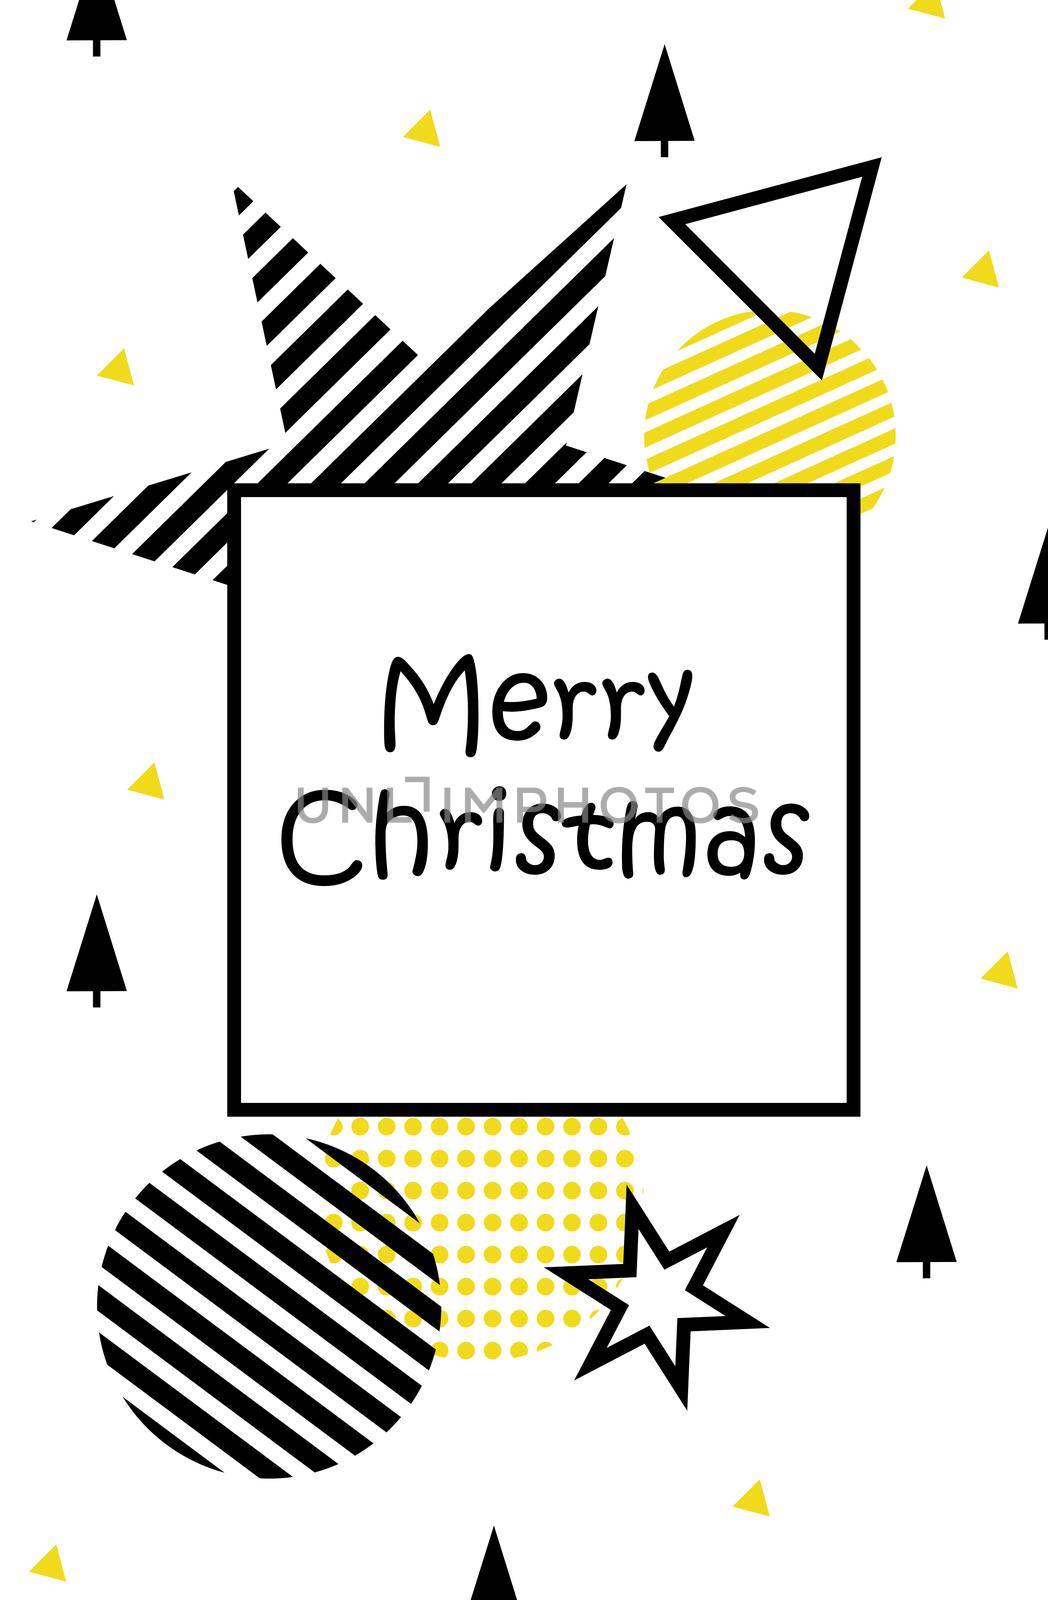 Happy New Year. Merry Christmas. Illustration festive with Christmas balls, stars. On a white background, black and yellow Christmas decorations. Grey and yellow balls in stripes